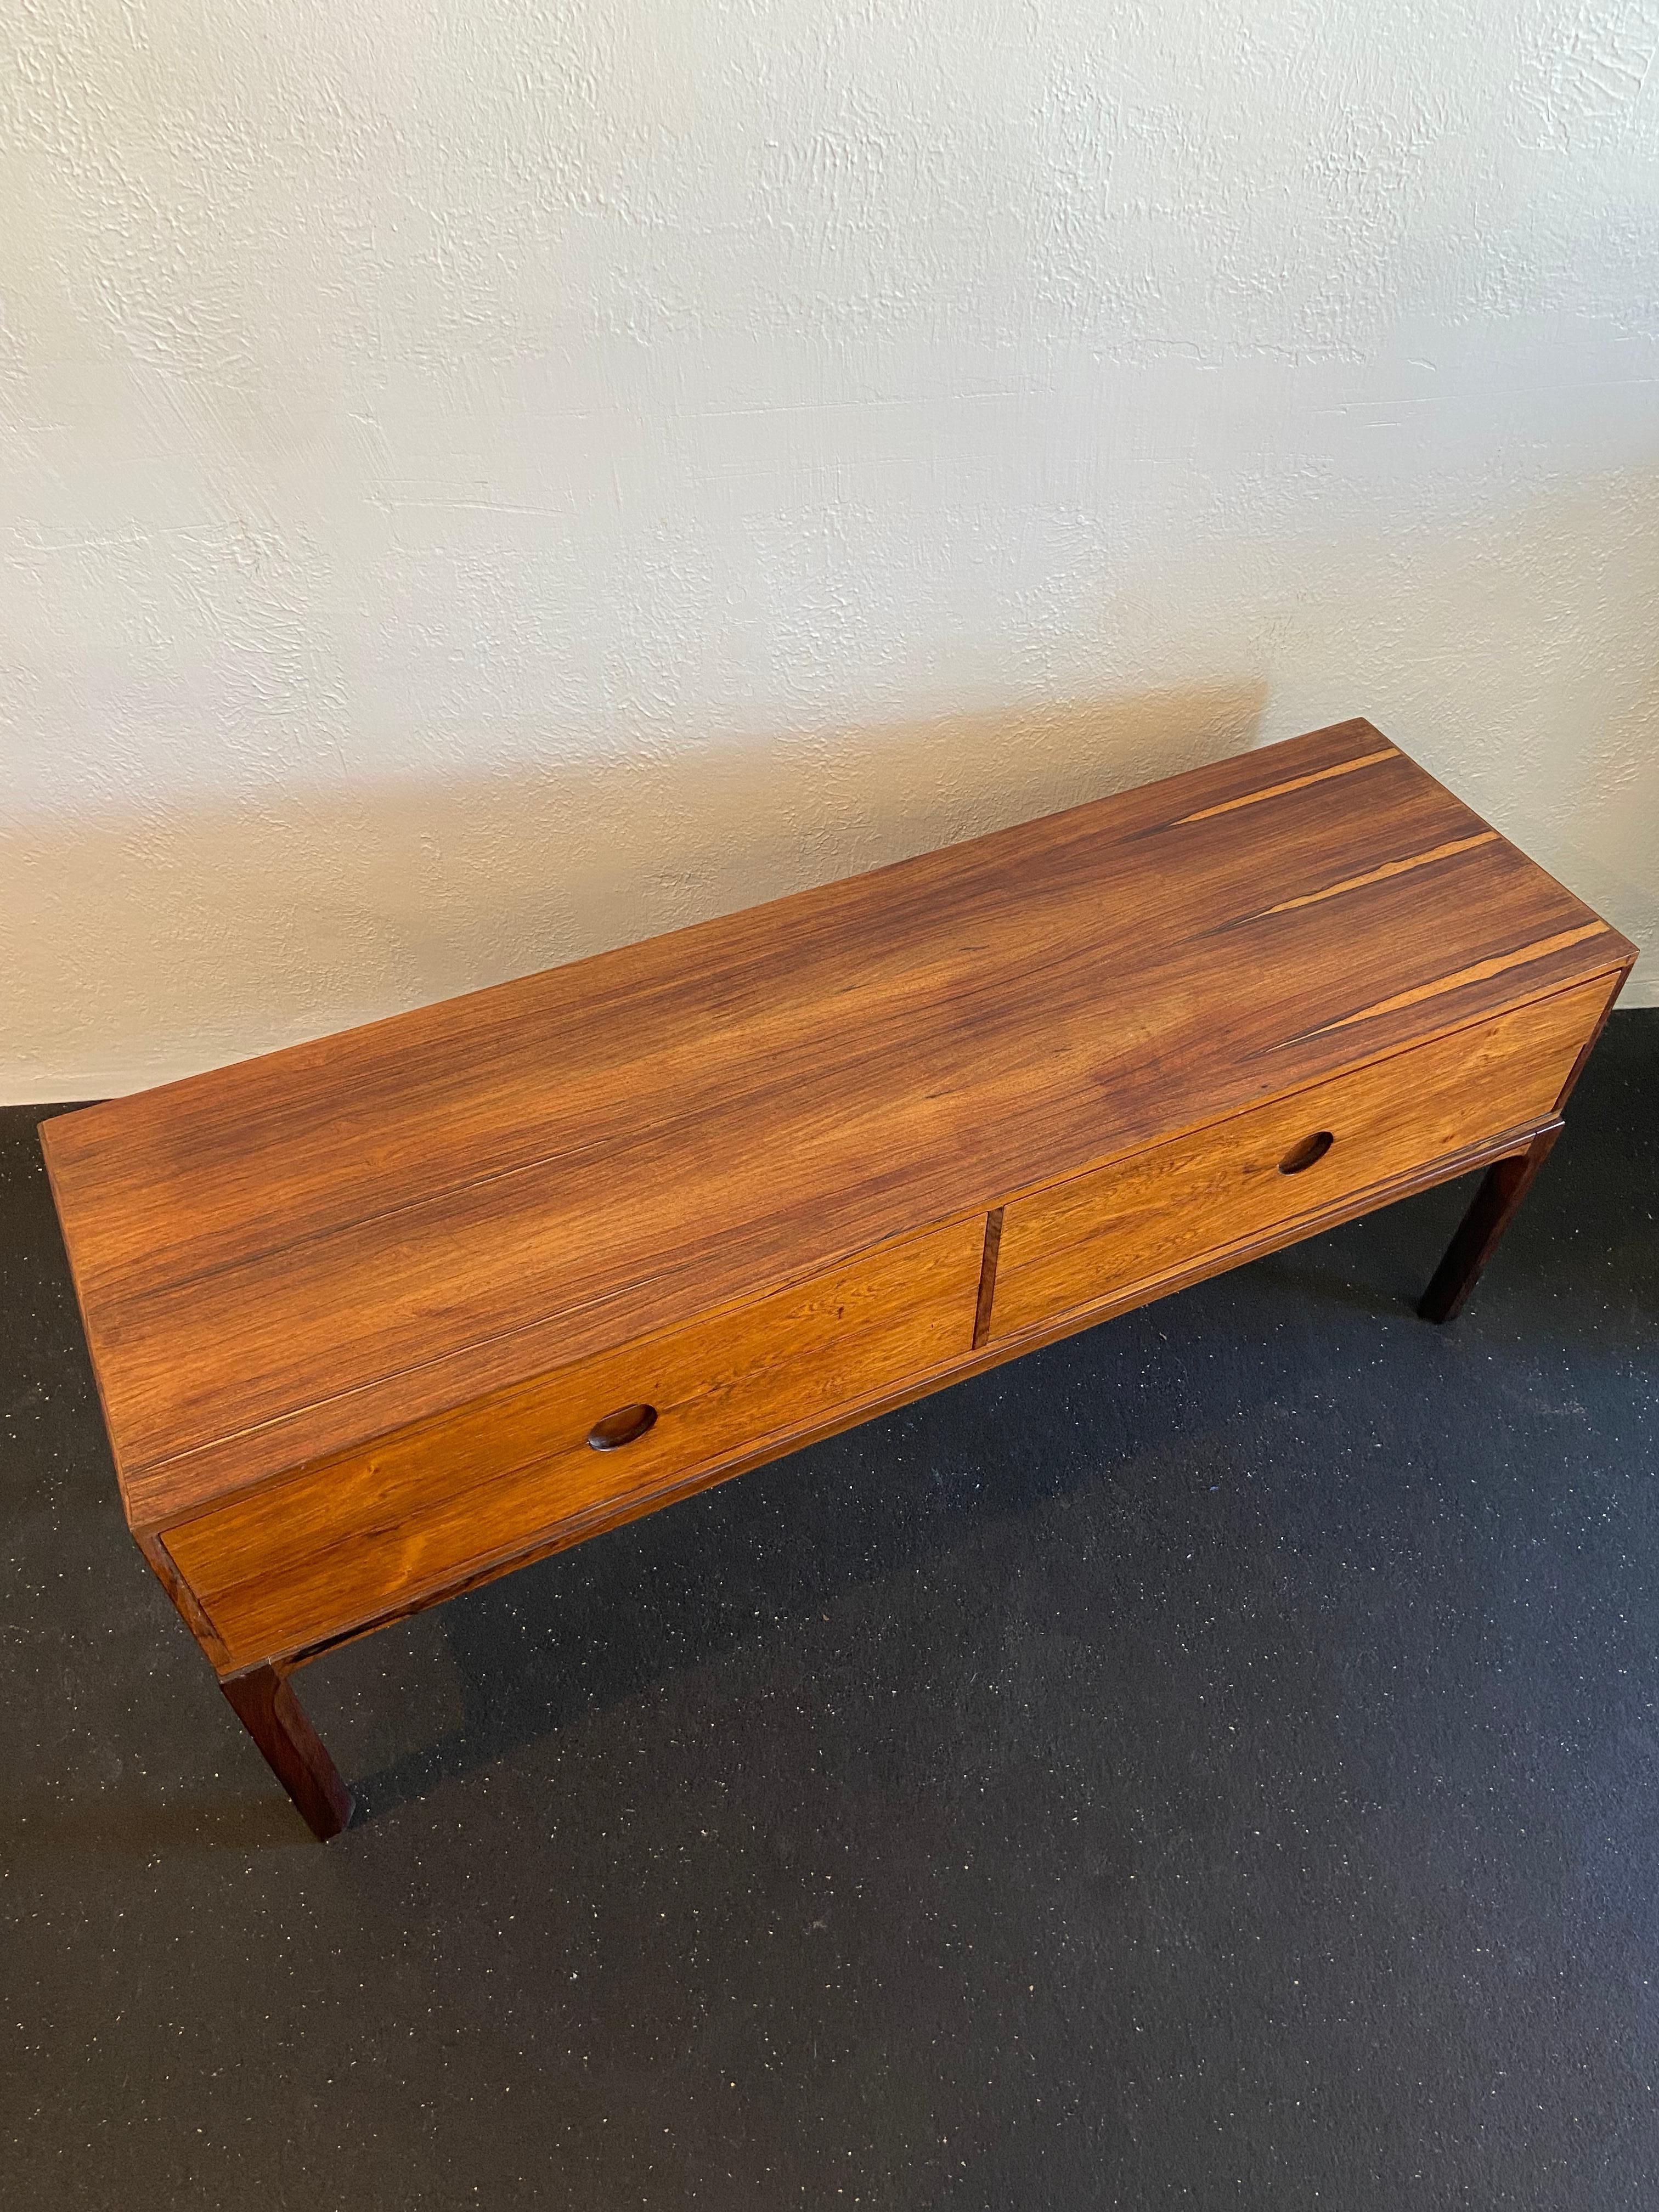 Kai Kristiansen diminutive rosewood chest of drawers. Four drawers with circular cut out pulls. Some faint wear to top (please refer to photos). 

Would work well in a variety of interiors such as modern, mid century modern, Hollywood regency,